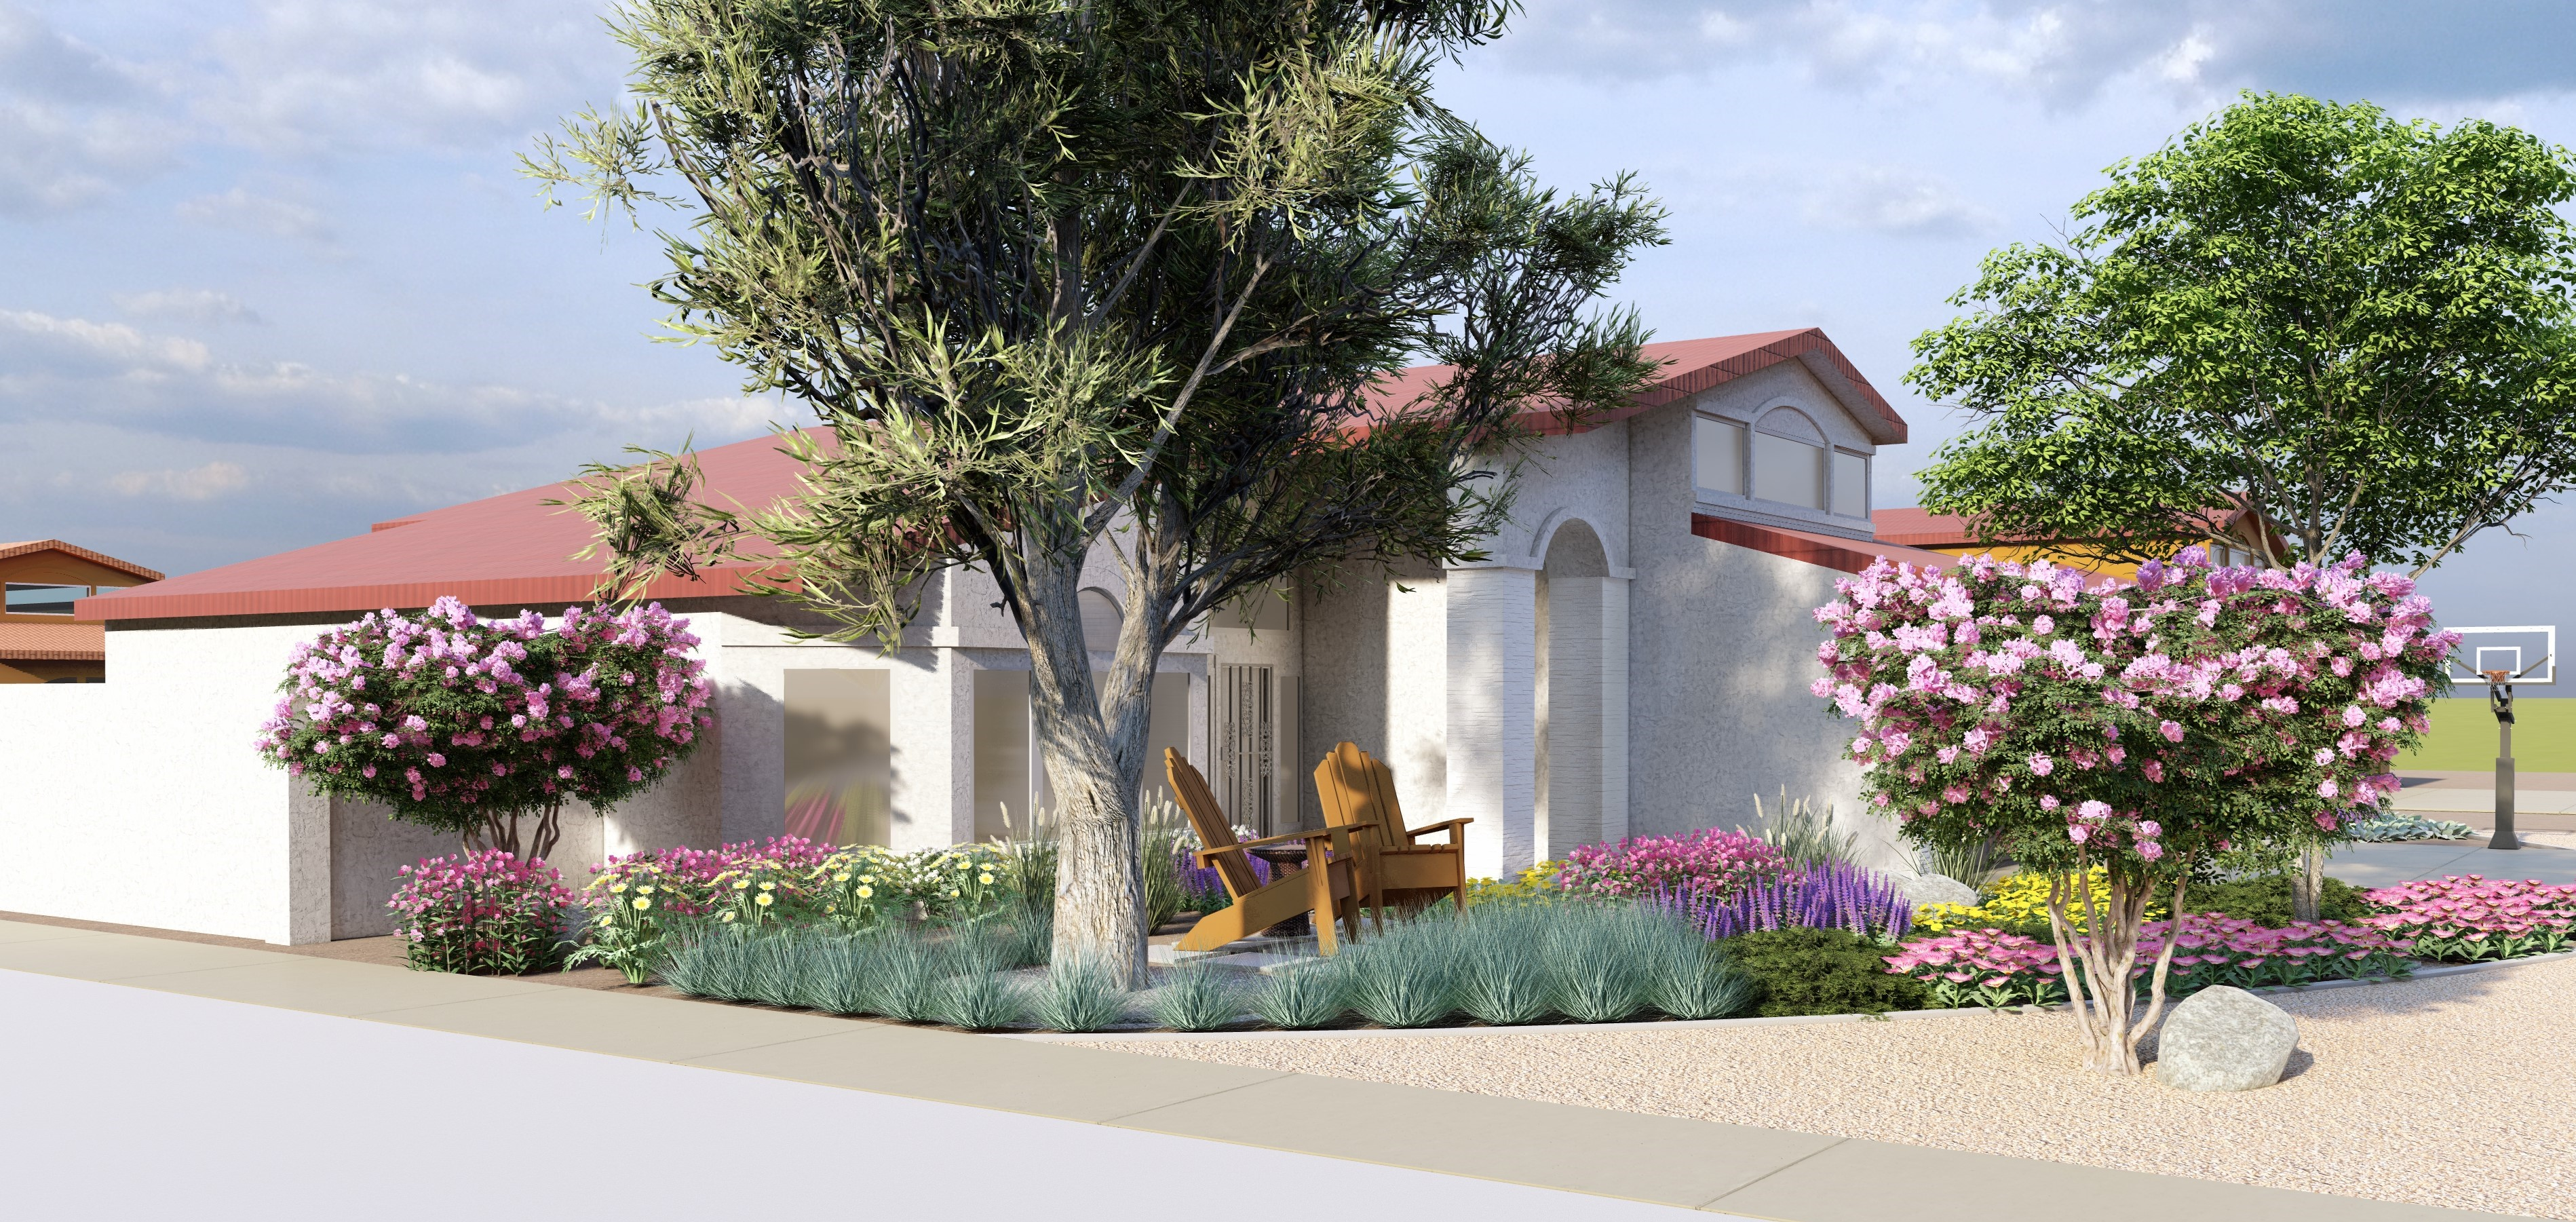 This garden features drought tolerant trees around colorful plants and flowers